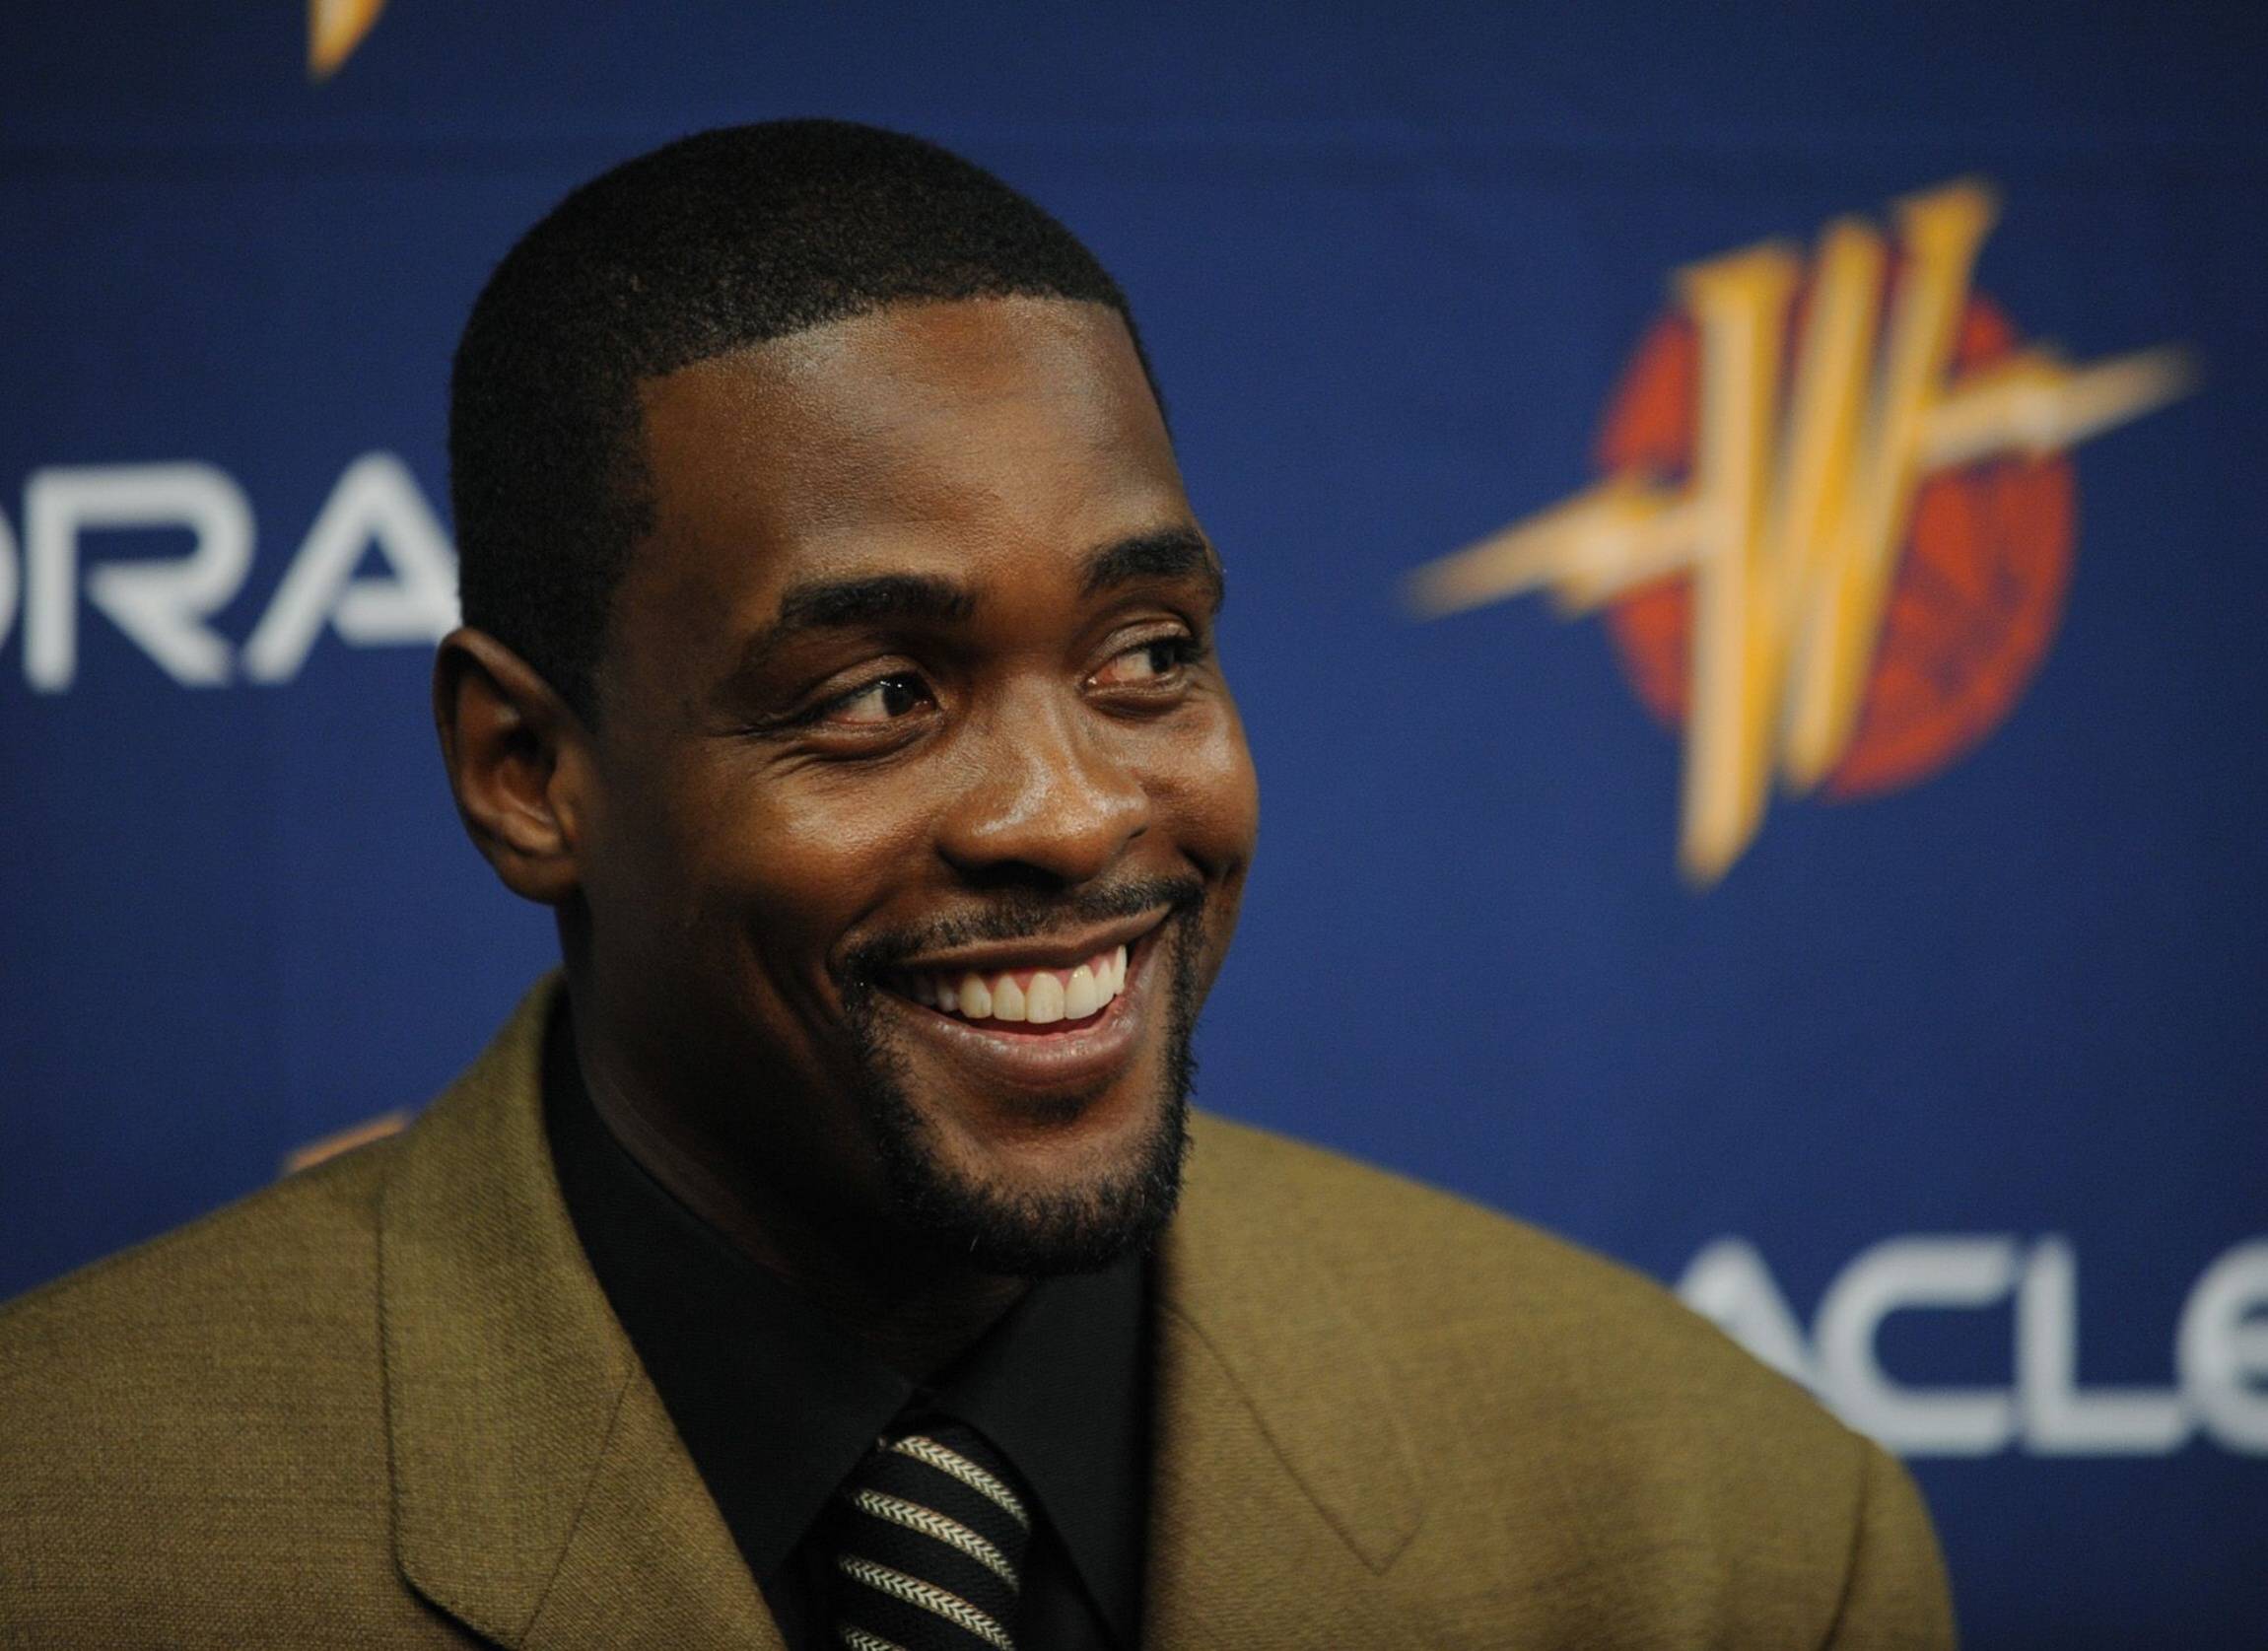 Chris Webber 2021 - Net Worth, Salary, Records, and Endorsements